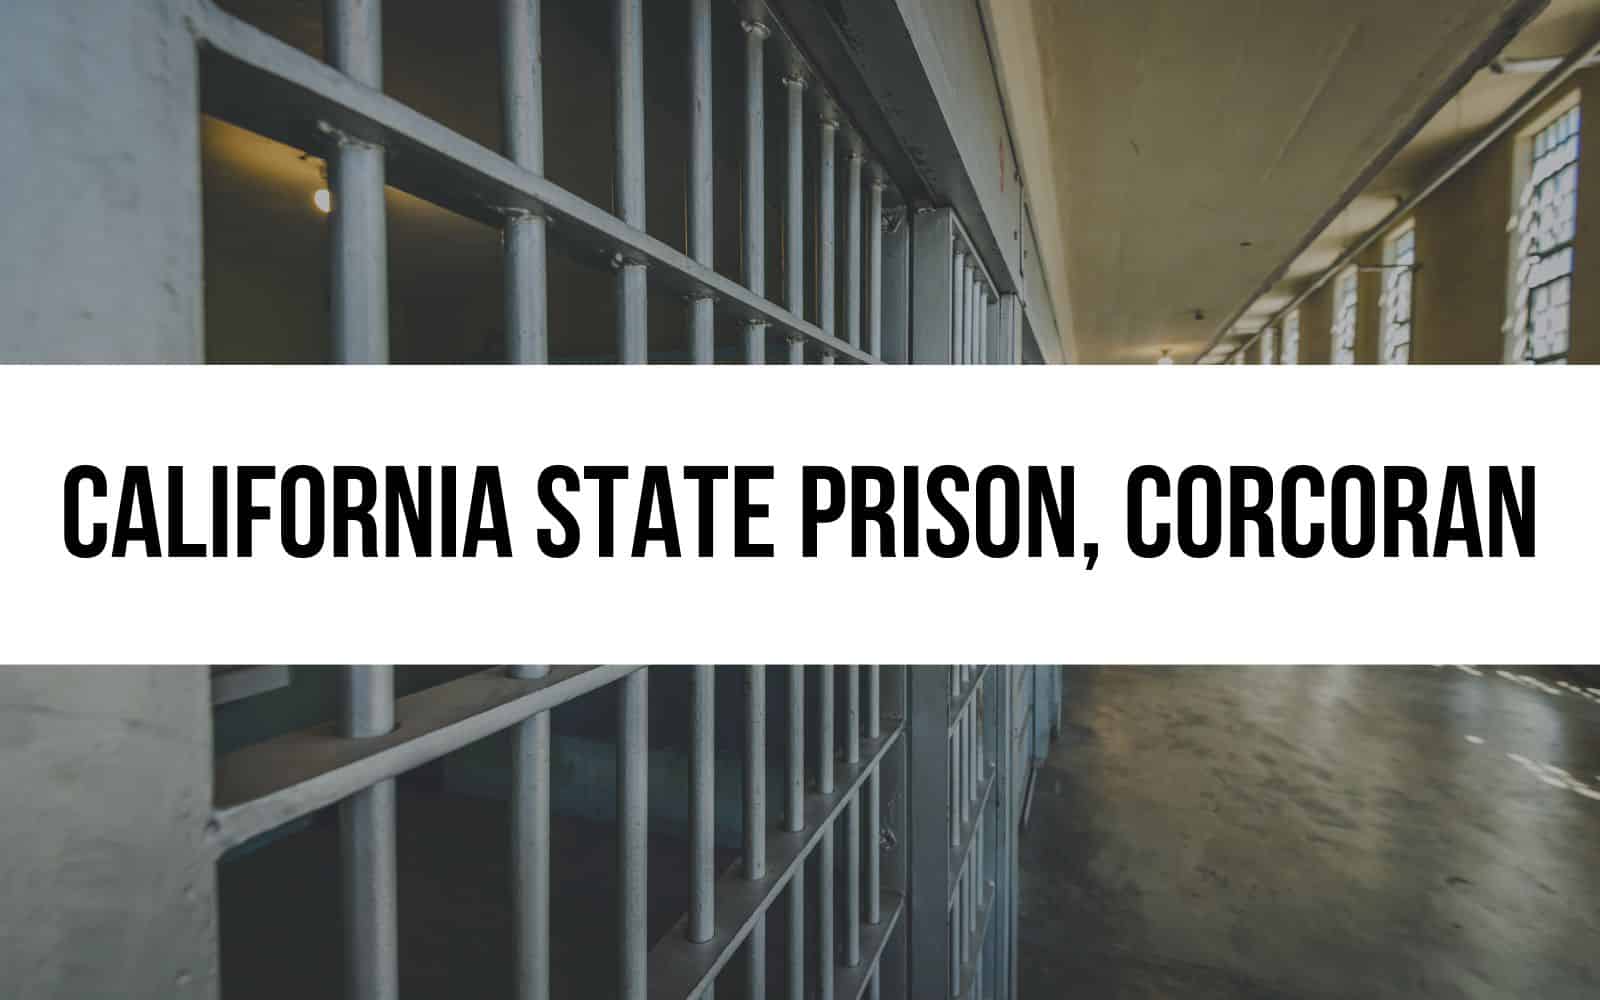 California State Prison, Corcoran: Life Inside Max Security